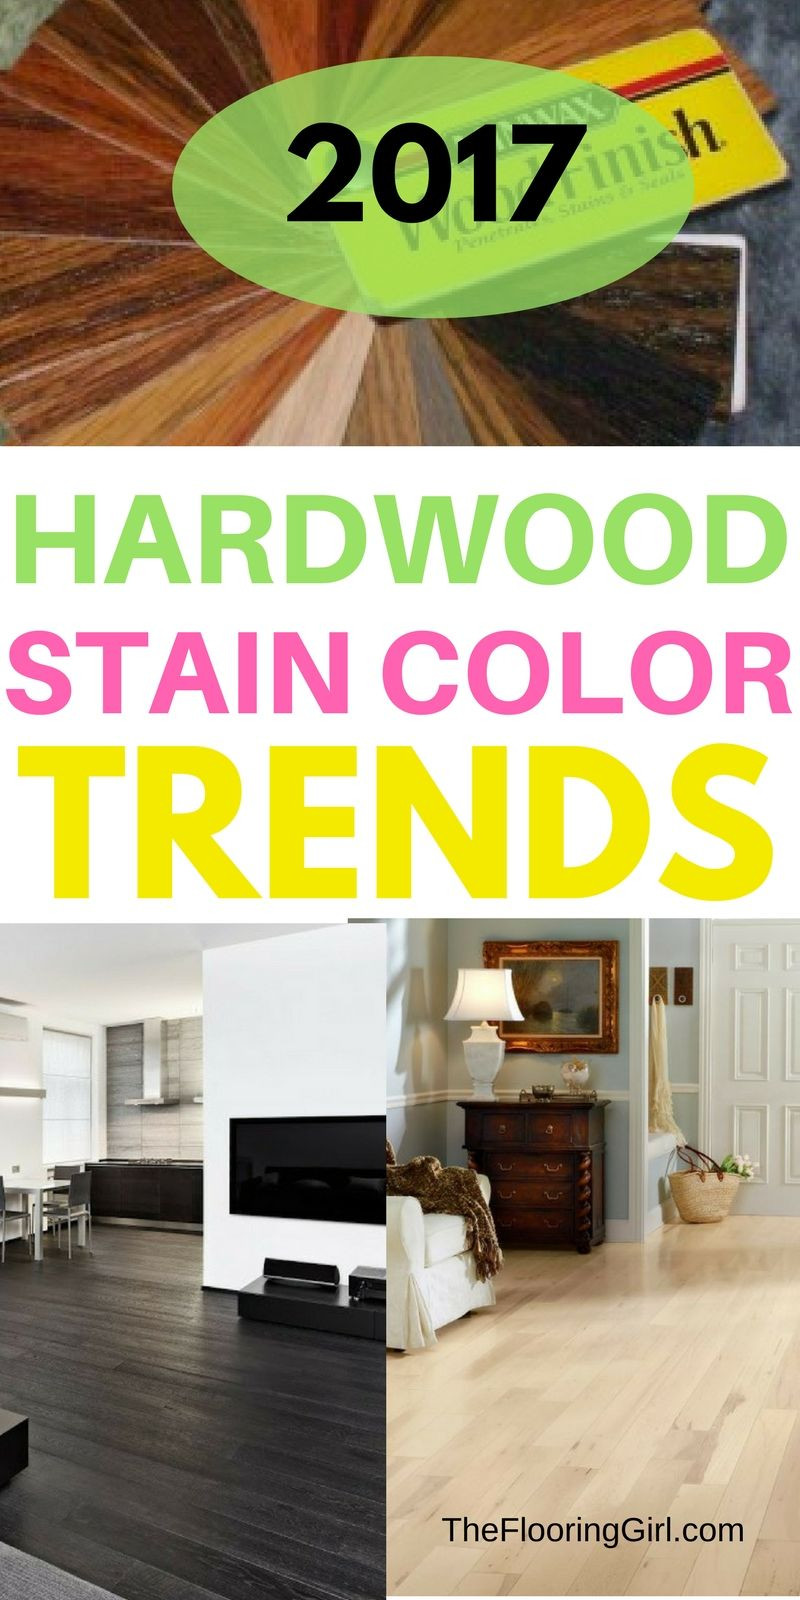 16 Awesome Laminate Flooring Vs Hardwood Resale Value 2024 free download laminate flooring vs hardwood resale value of hardwood flooring stain color trends 2018 more from the flooring throughout hardwood flooring stain color trends for 2017 hardwood colors that a